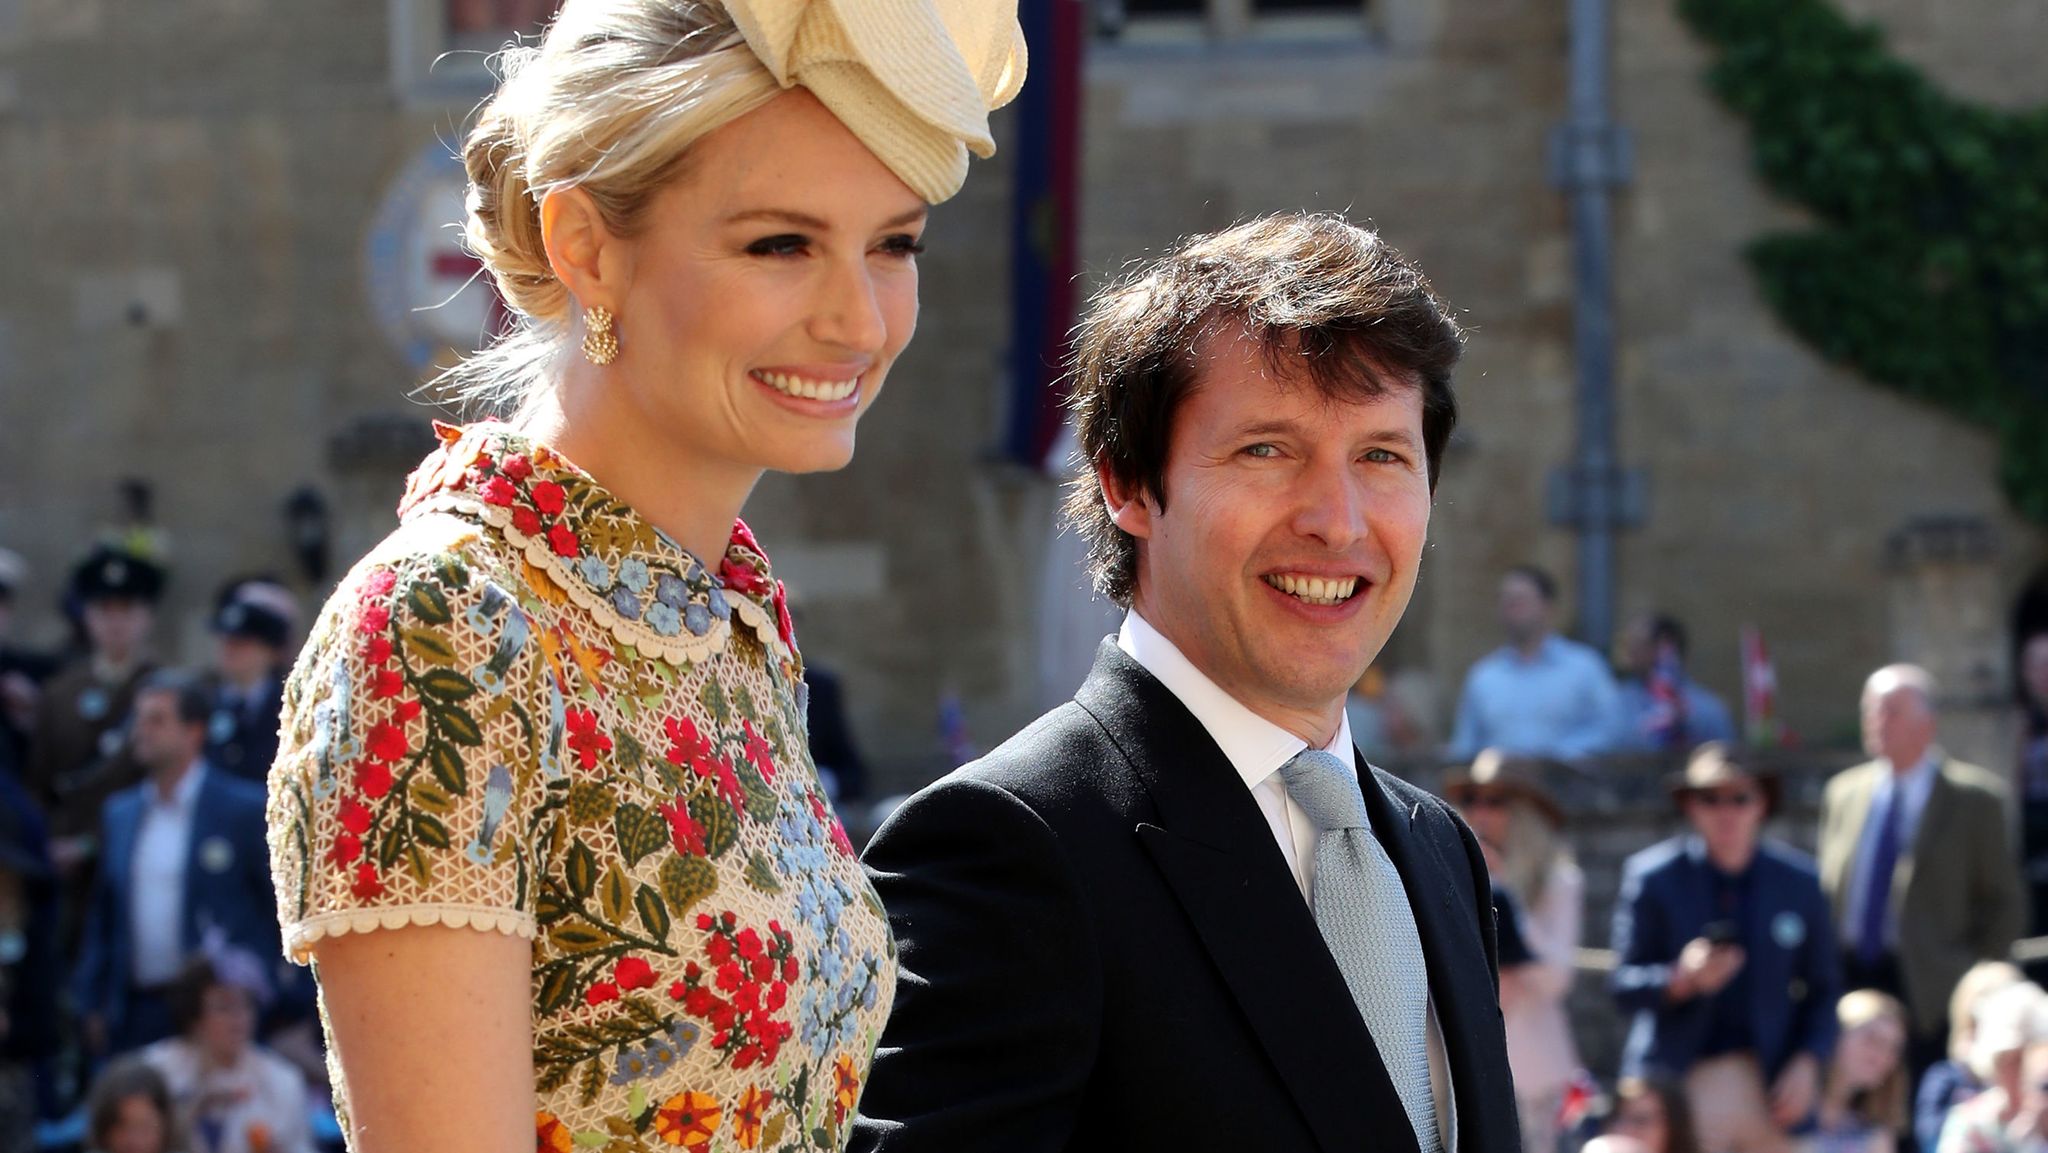 James Blunt and Sofia Wellesley arrive for the wedding ceremony